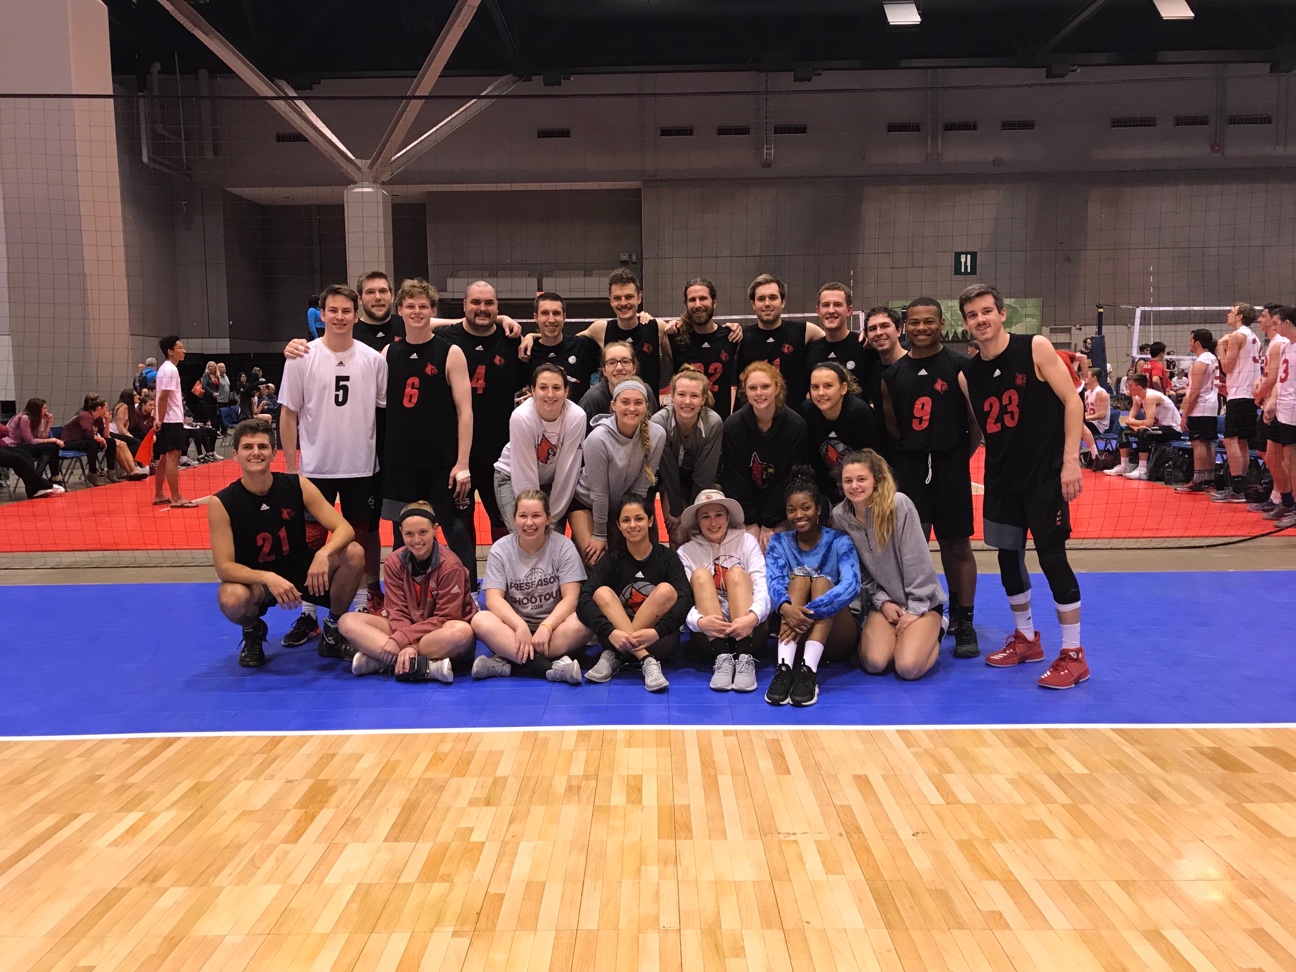 UofL Men's Volleyball Club takes home national championship